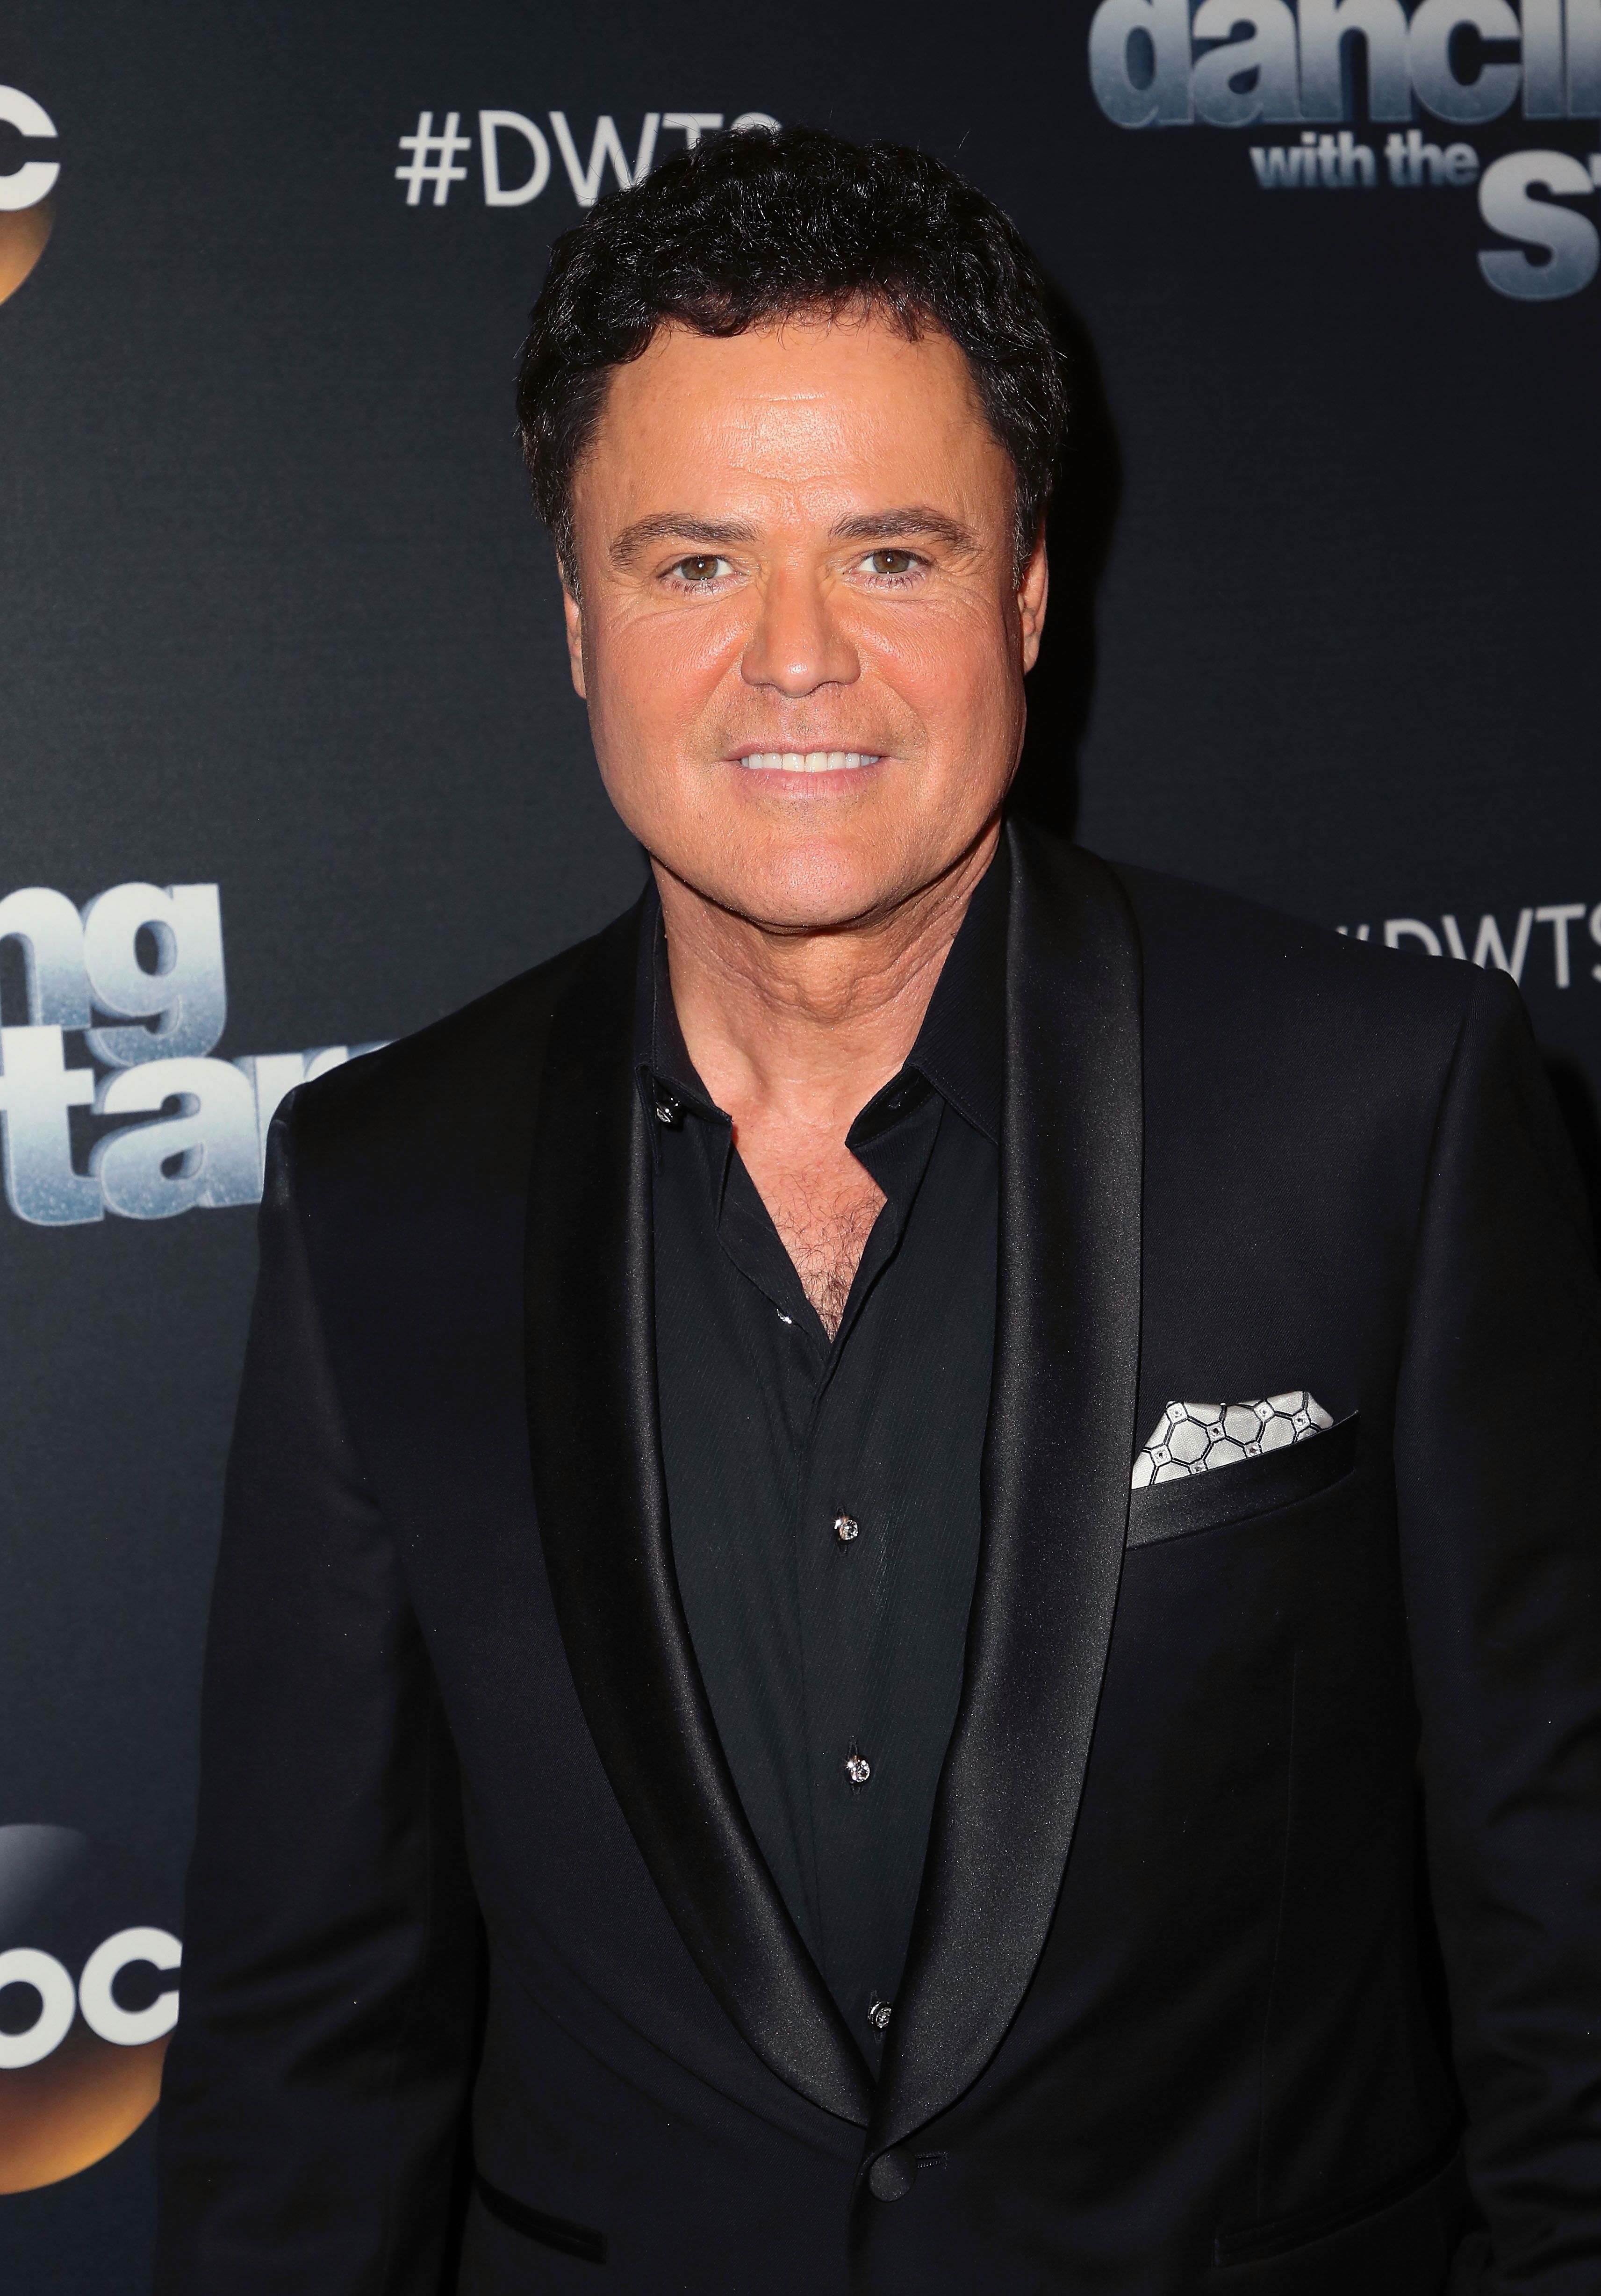 Donny Osmond at the "Dancing with the Stars" Season 27 premiere in 2018 in Los Angeles, California | Source: Getty Images